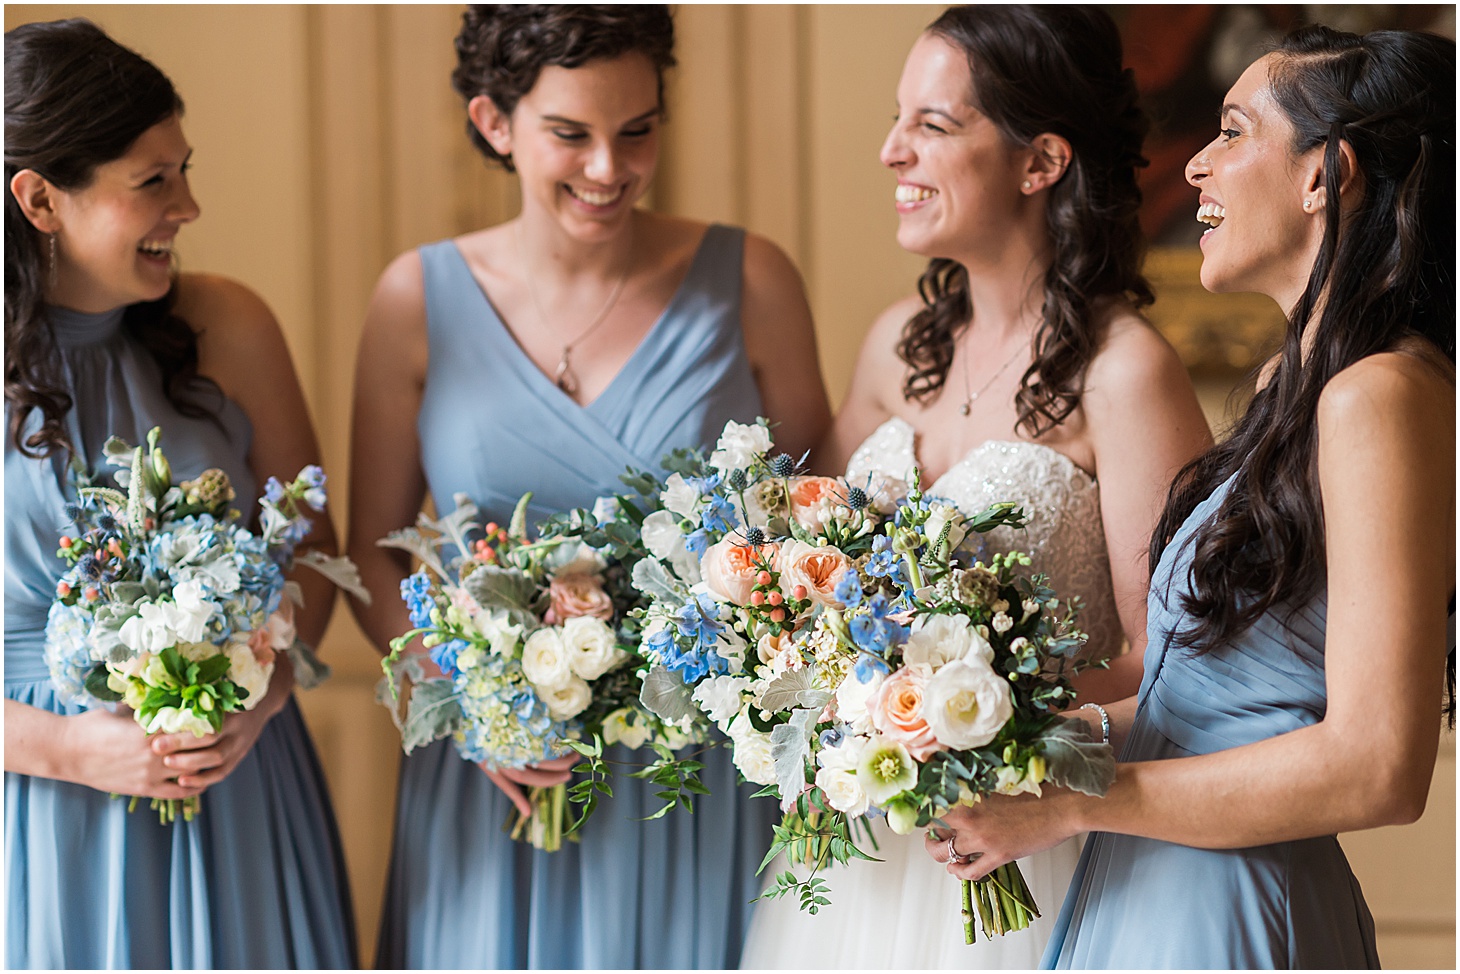 Bridal Party Portraits at National Museum of Women in the Arts, Kimpton Donovan Hotel, Dusty Blue and Pink Jewish Wedding at Women in the Arts, Sarah Bradshaw Photography, DC Wedding Photographer 